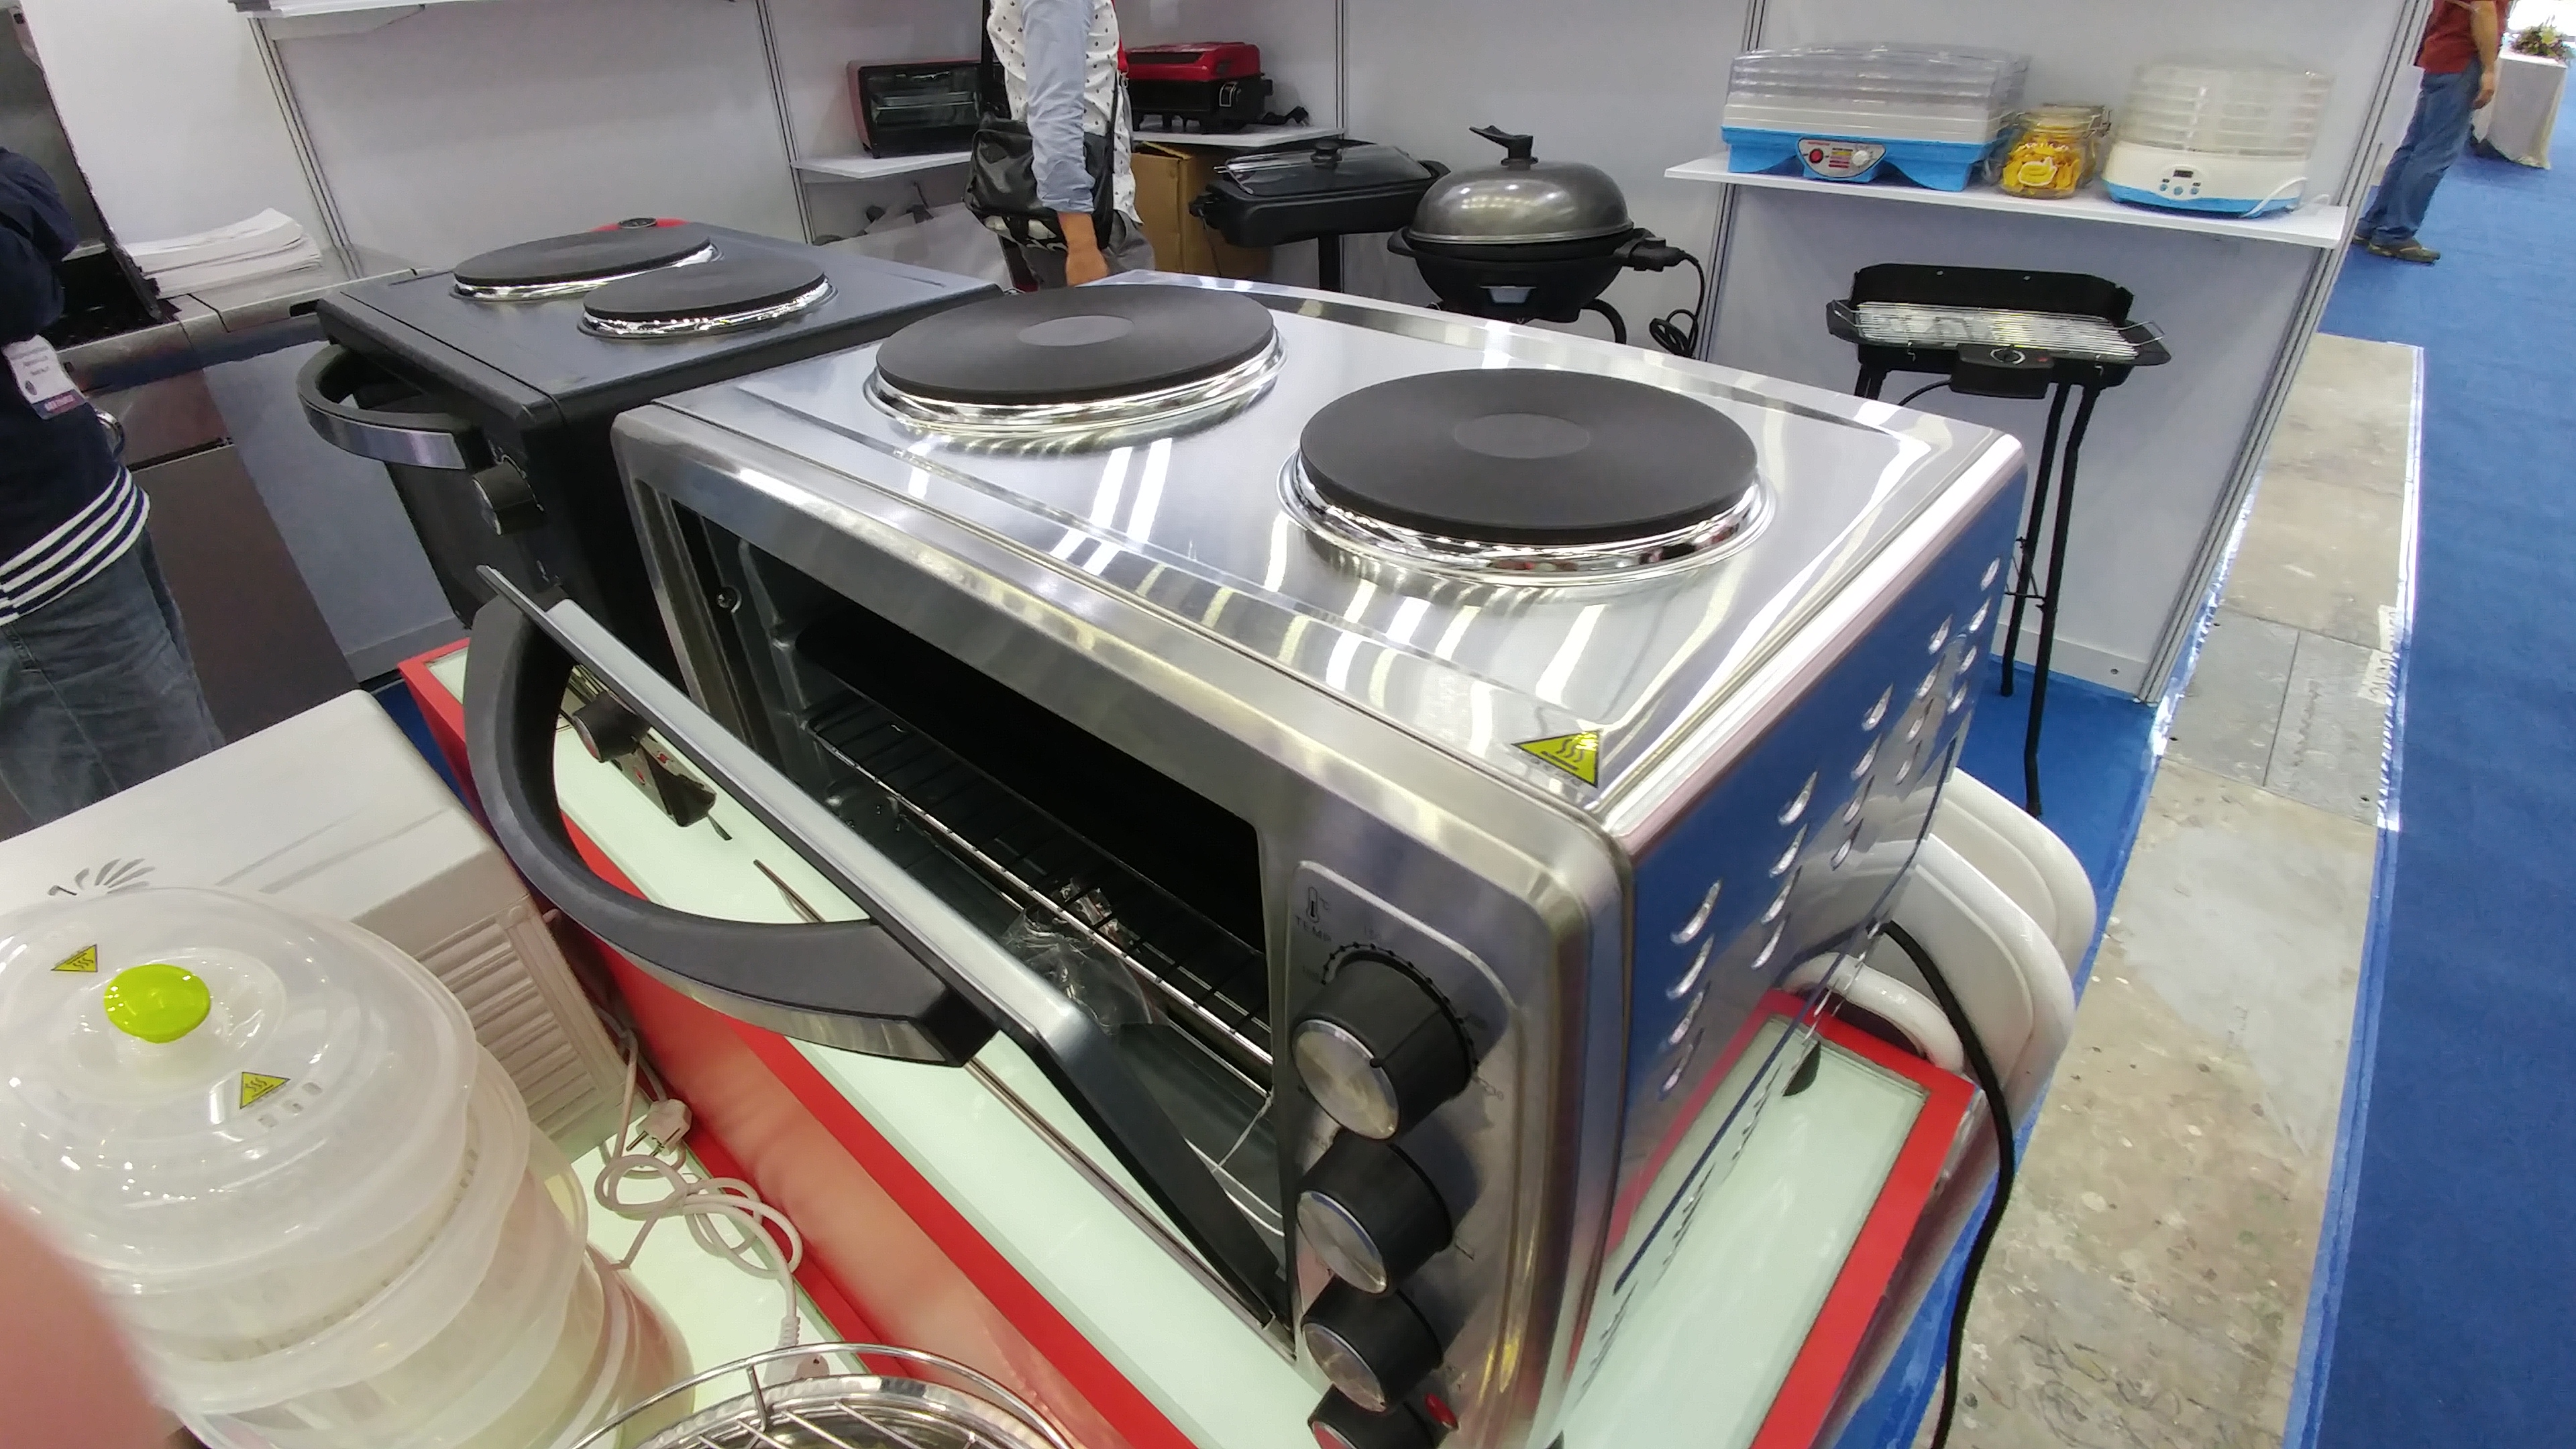 The CE China 2016 show had some pretty cool kitchen appliances for tight spaces. Like this combo toaster oven with two induction cook tops on top. The LG G5 super wide captures stunning environmentals showing a lot of background.